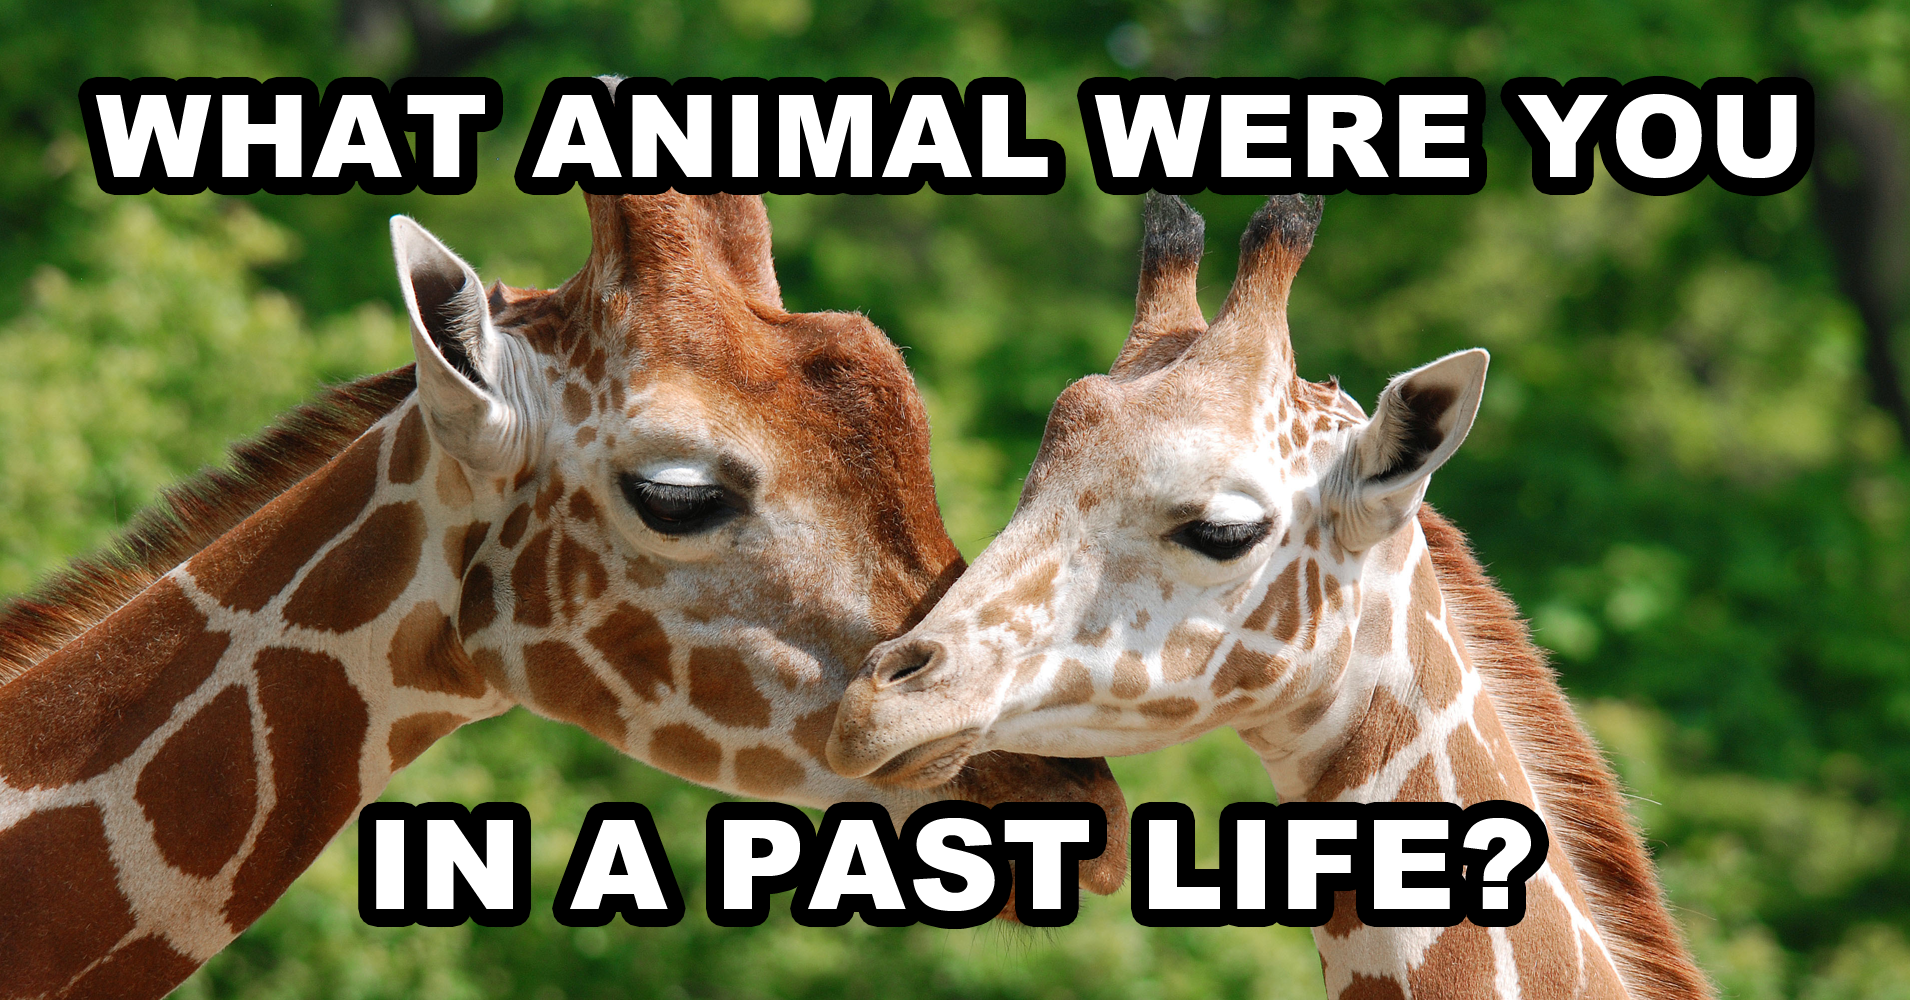 What Animal Were You In A Past Life? - Quiz 